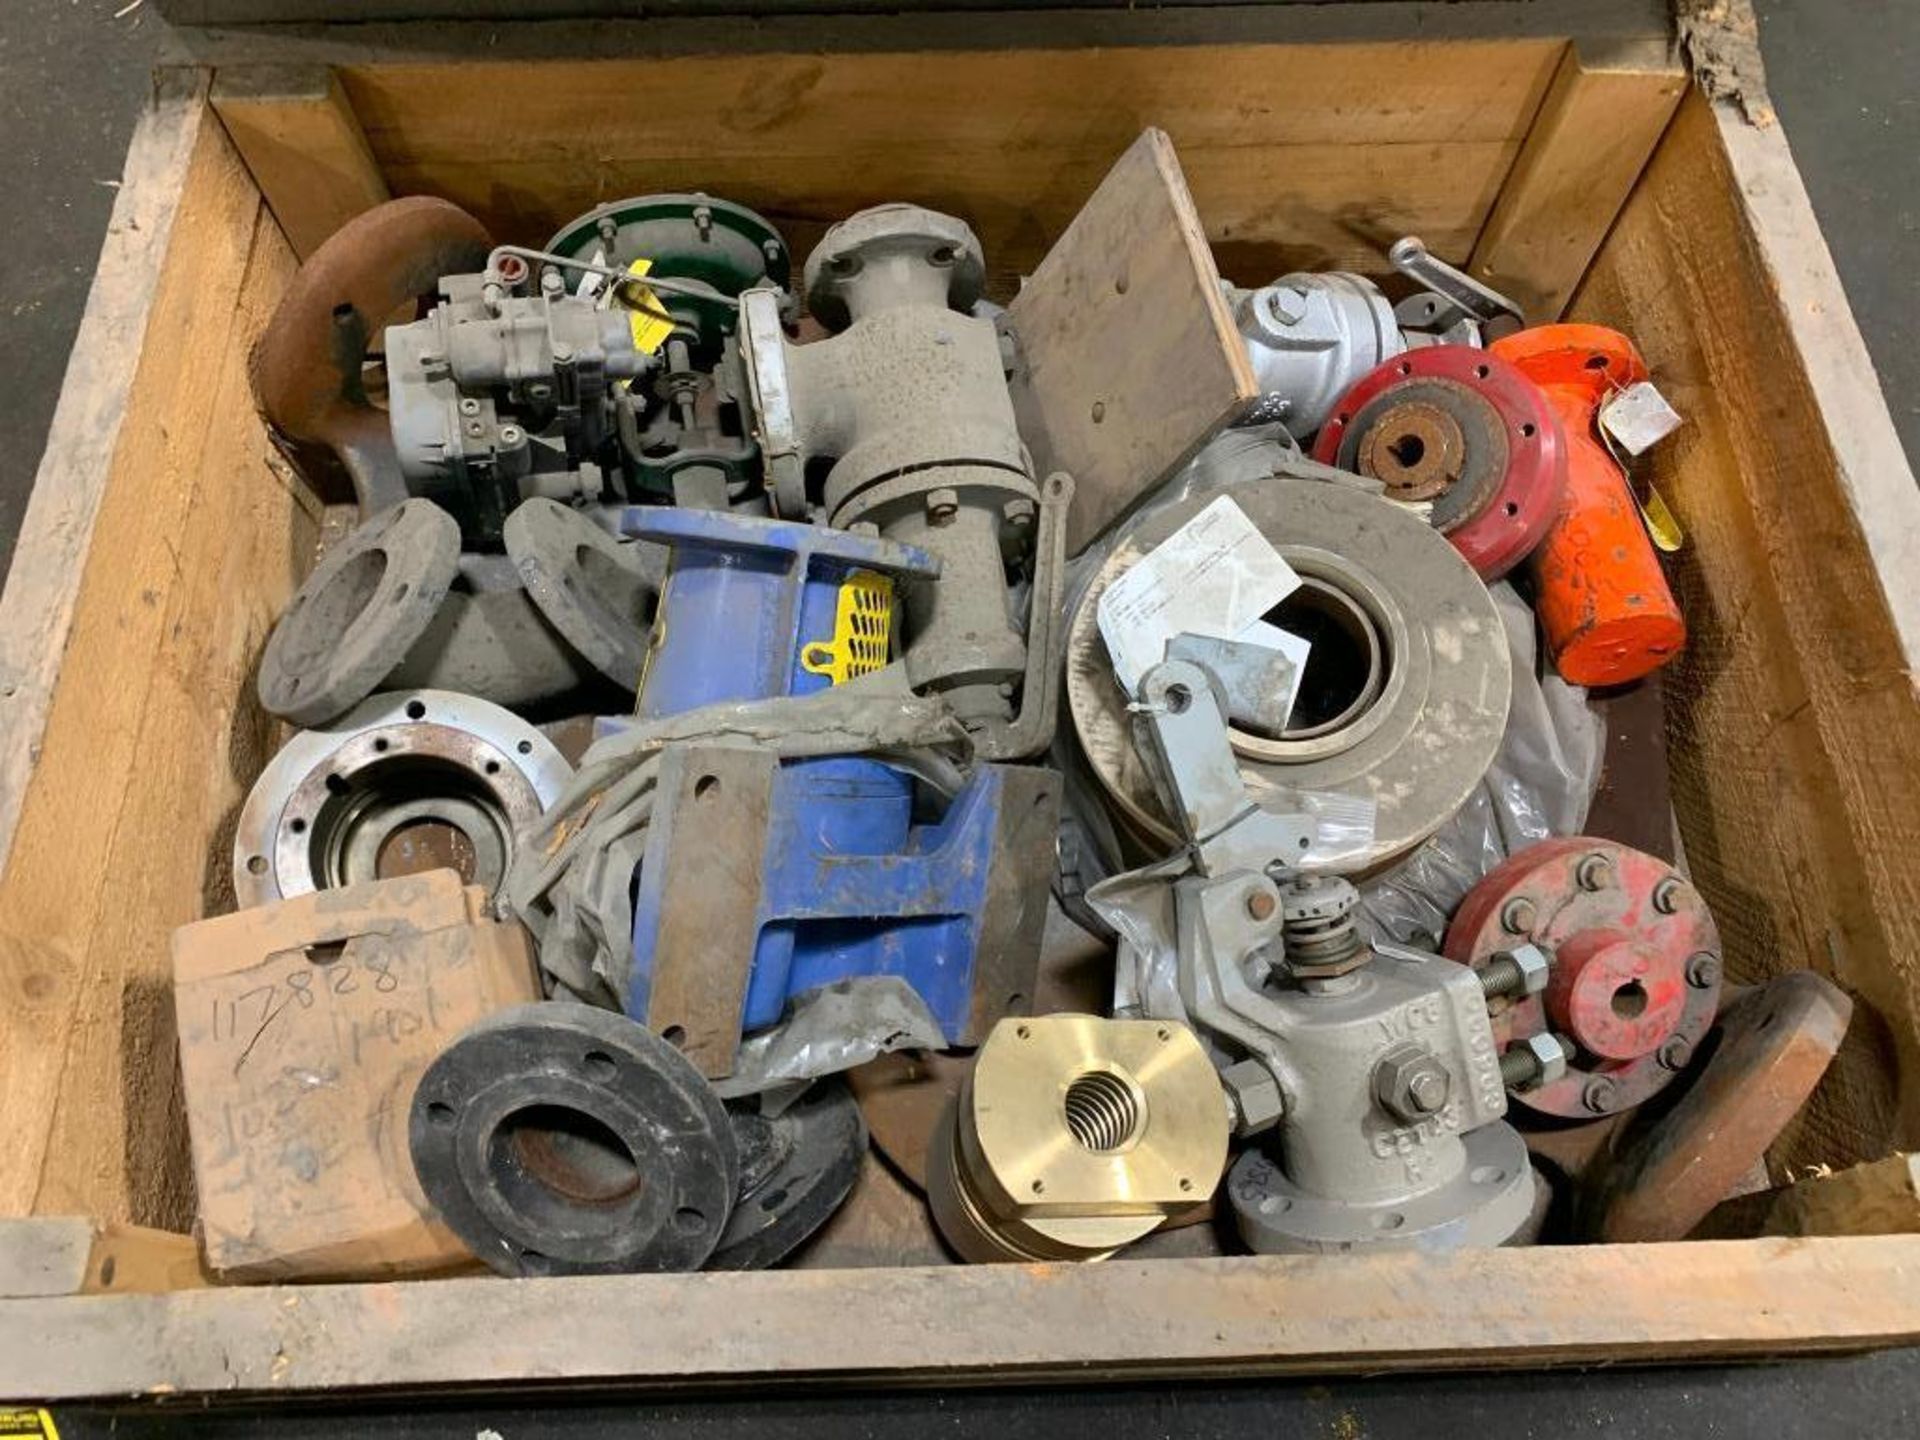 Crate w/ Assorted Pump Assemblies, Actuator, Relief Valve, Other